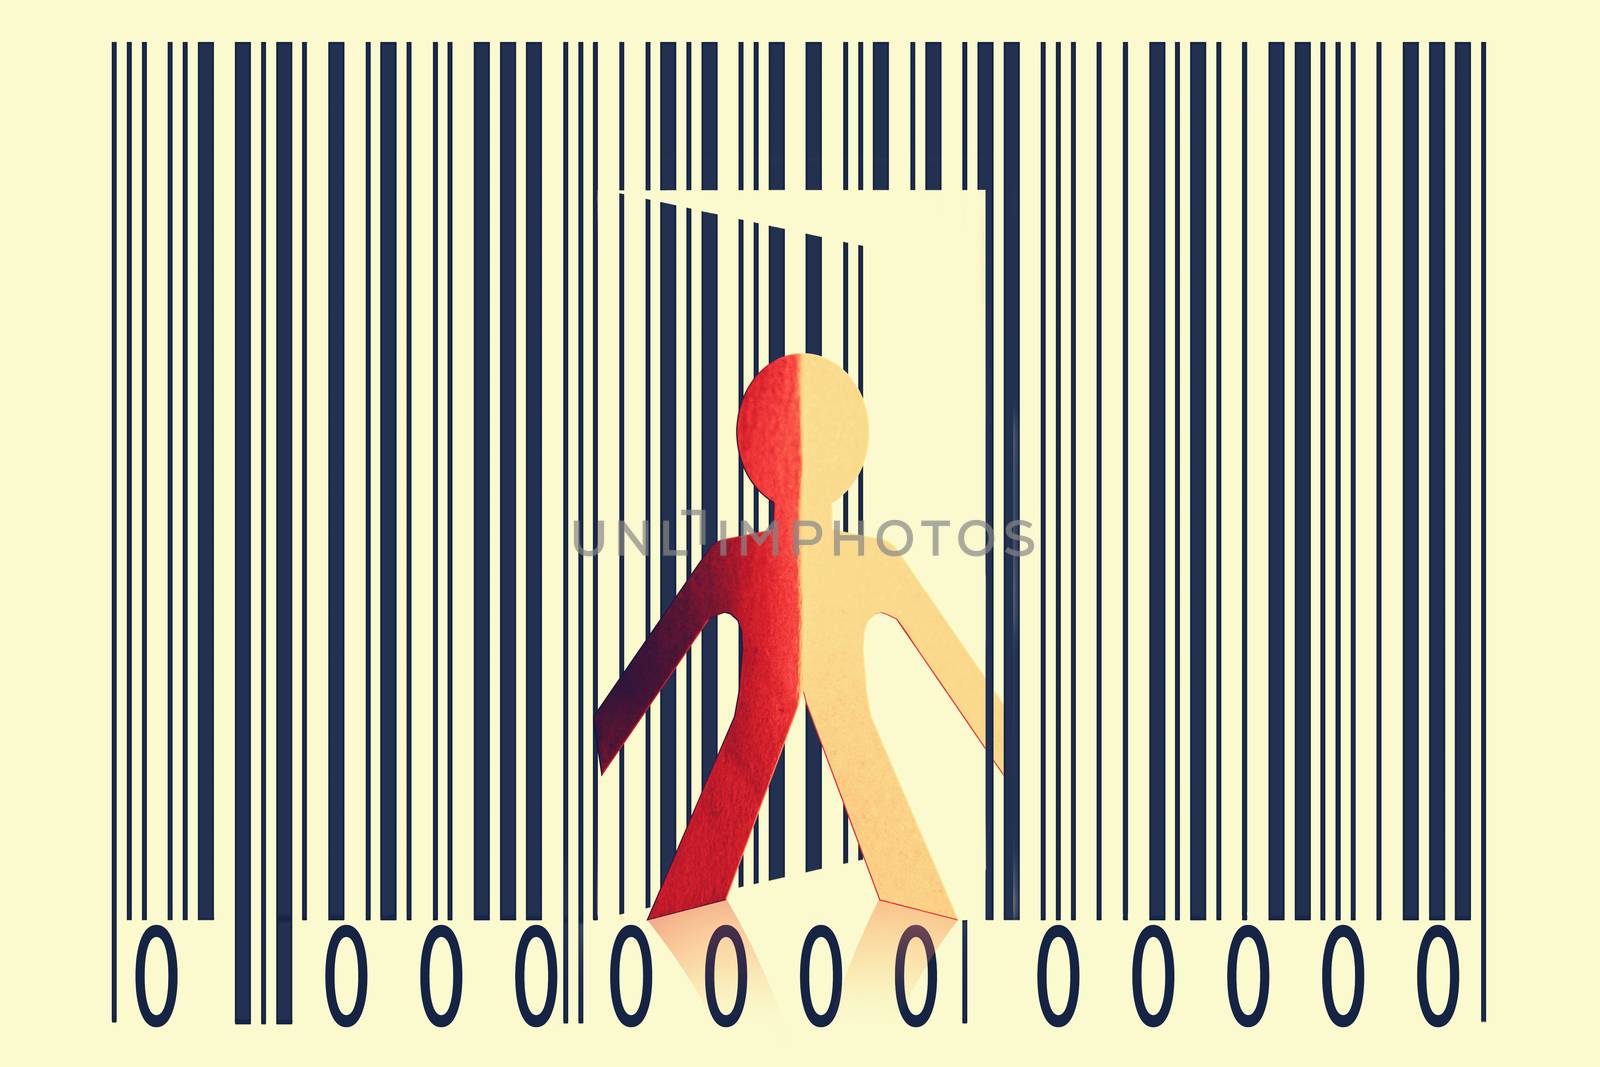 Paperman coming out of a bar code to go out